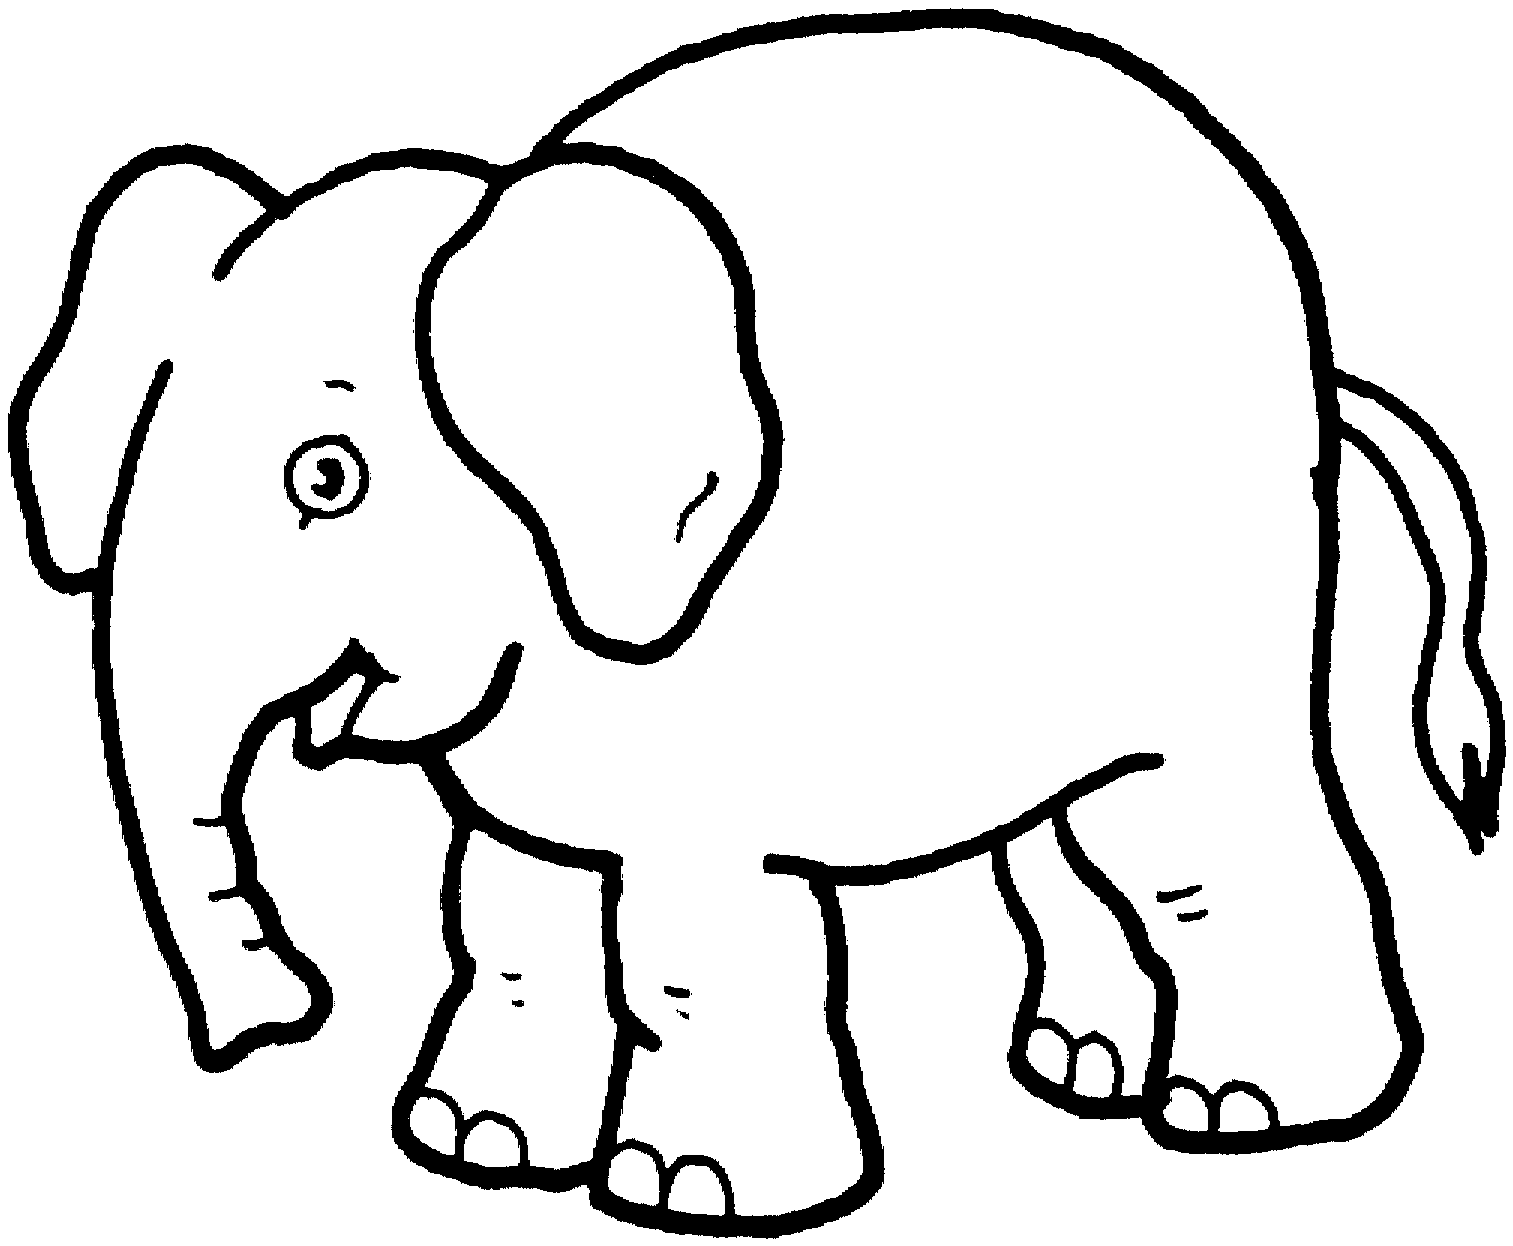 Elephant Drawings For Kids - ClipArt Best - ClipArt Best